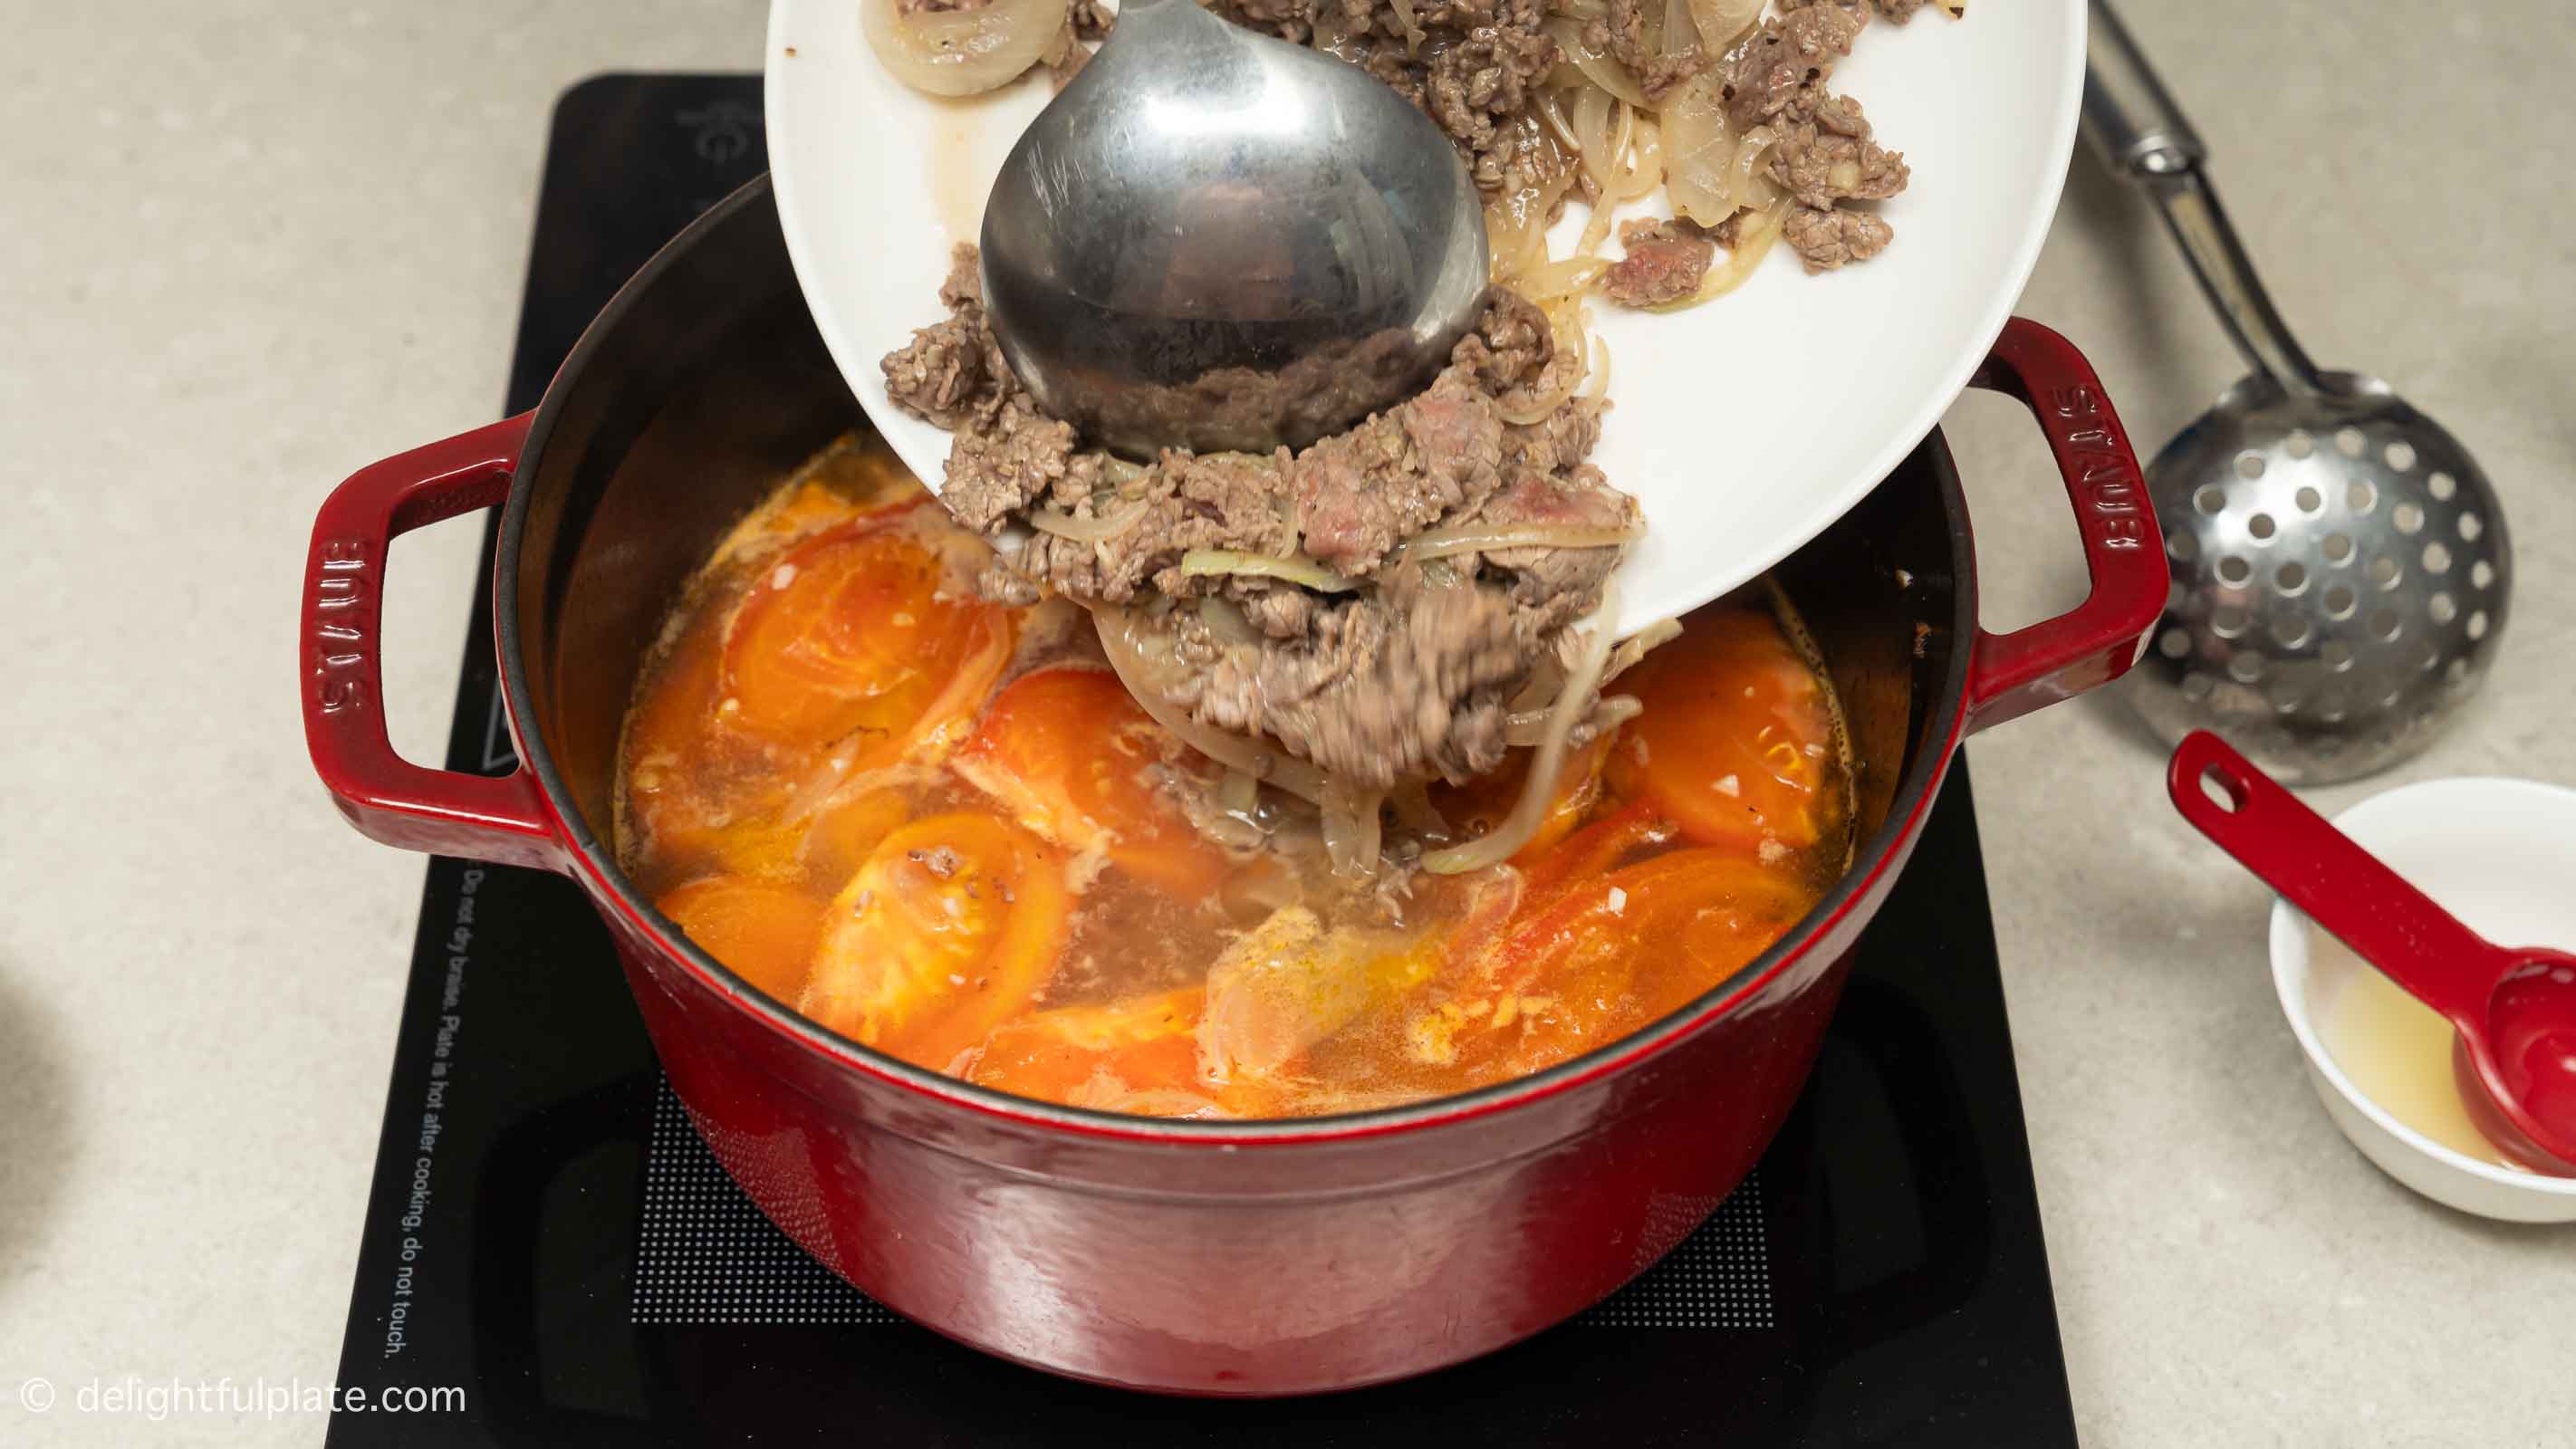 adding sautéed beef from a plate to the soup.